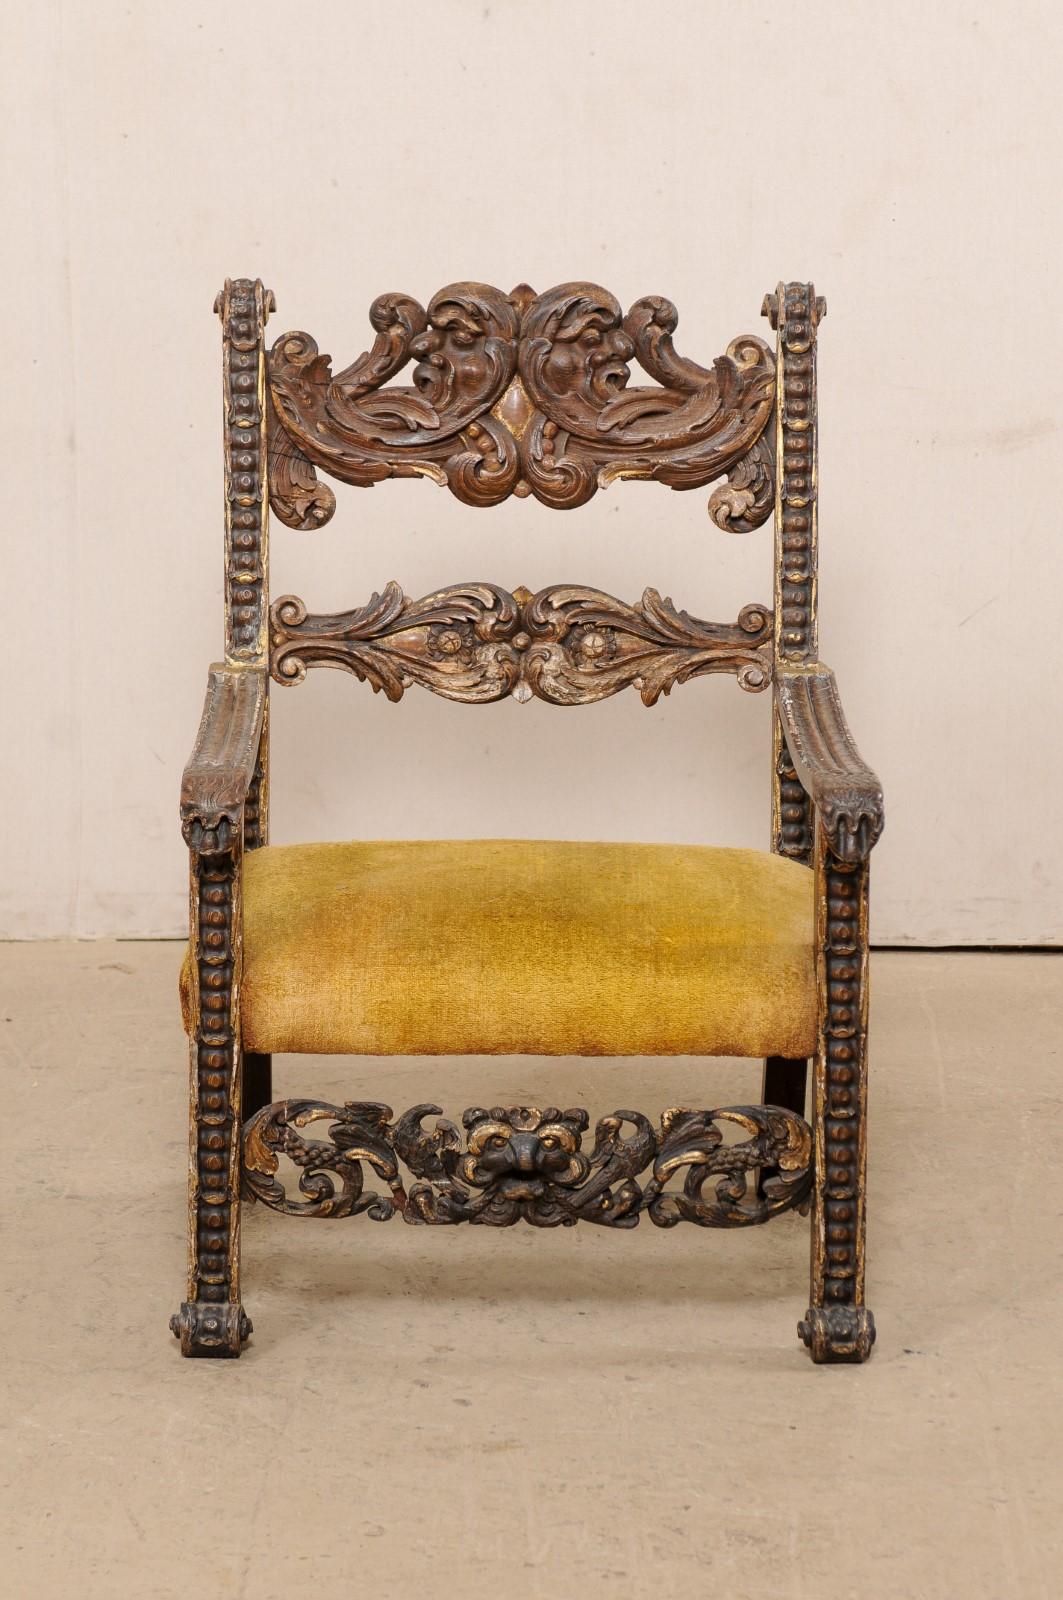 Handsome 18th C Italian Baroque Arm Chair with Intricately Carved Details For Sale 3